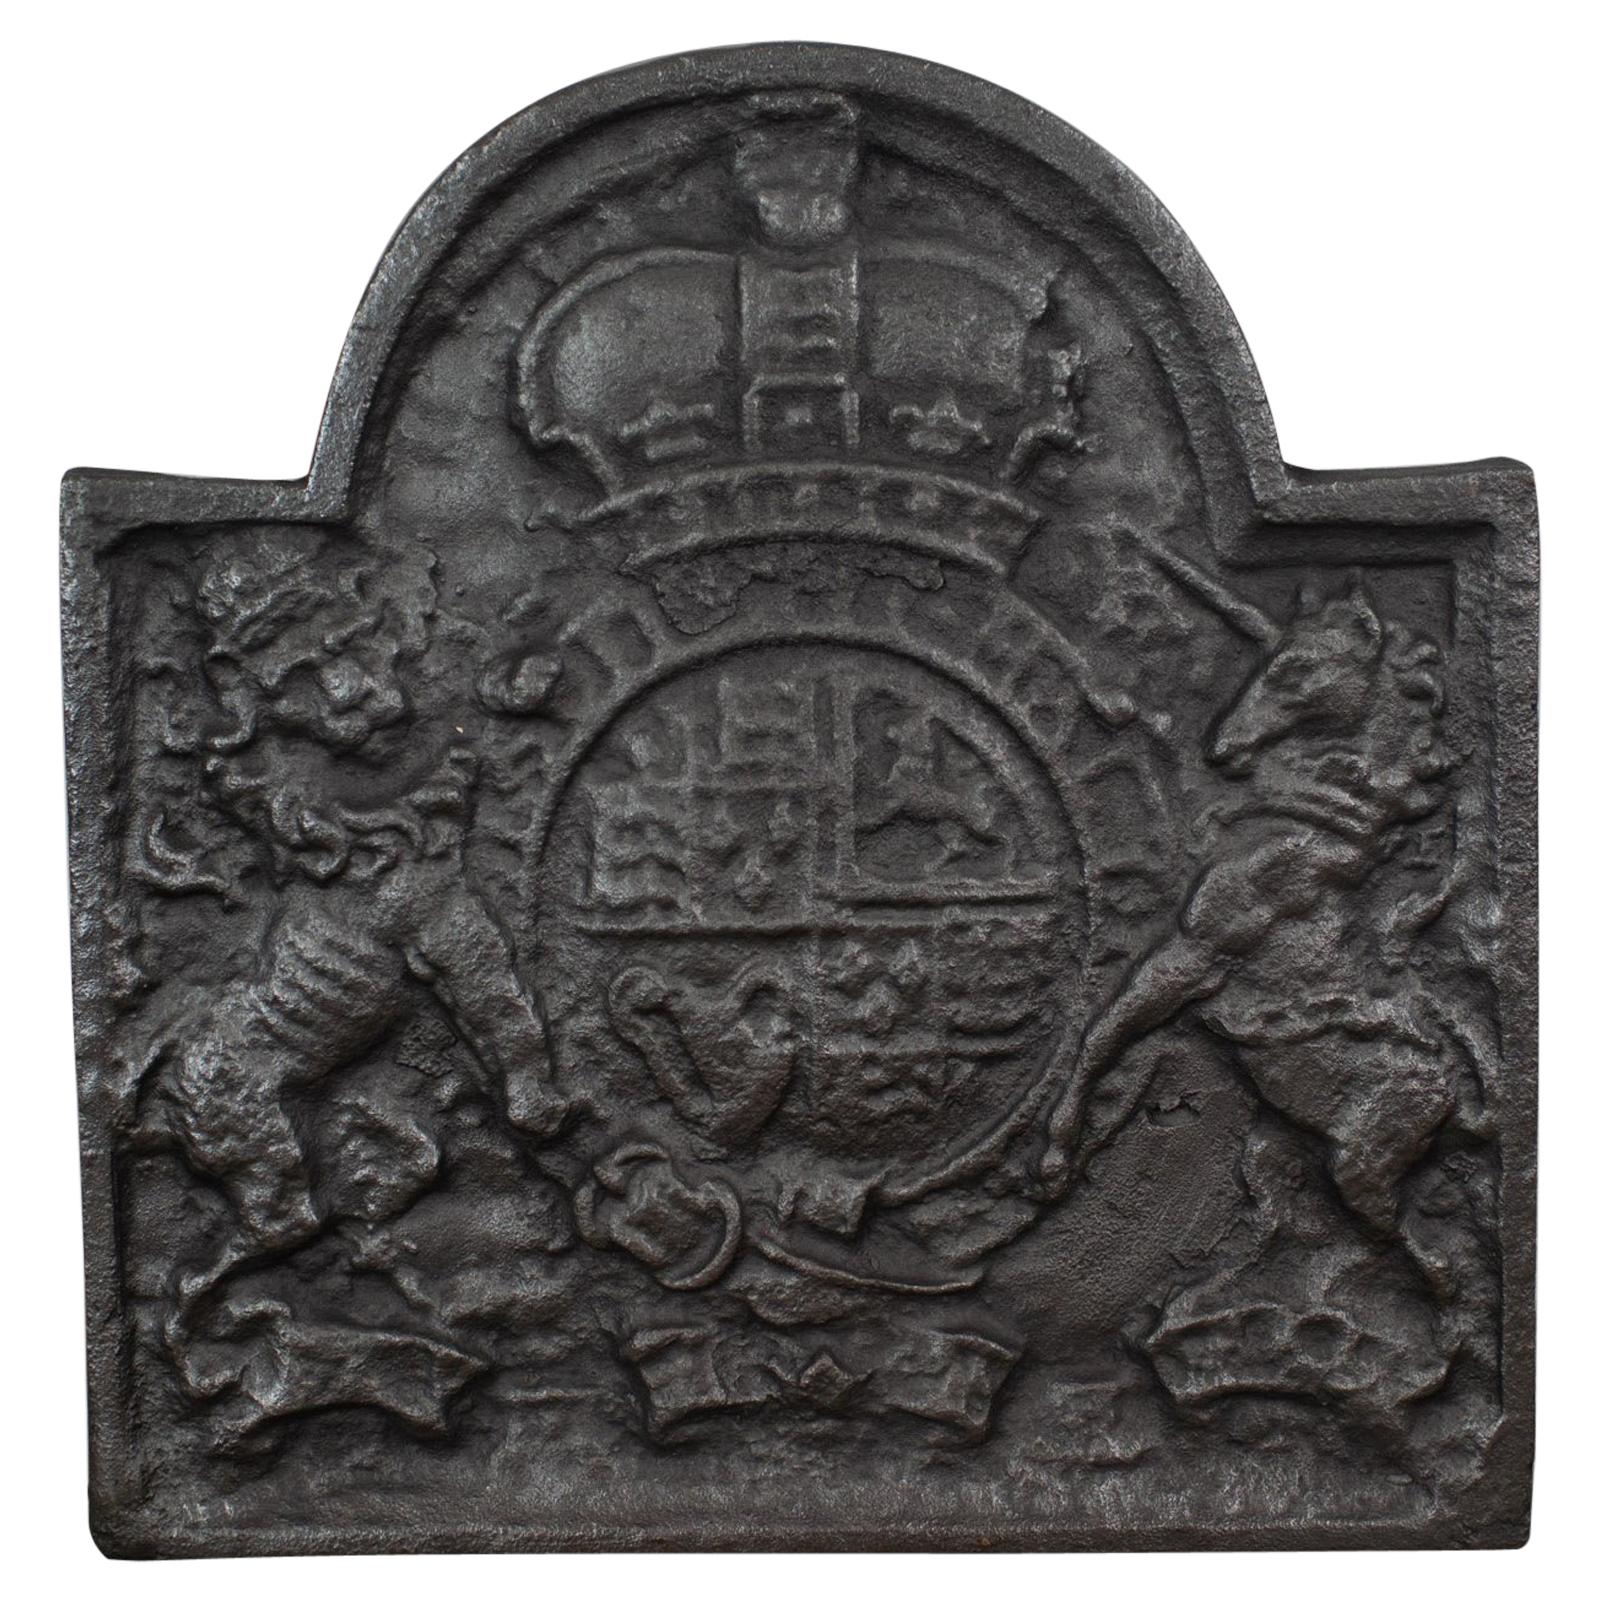 Cast Iron Fire Back, Royal Crest, English, Heavy, Plate, Fireplace, 20th Century